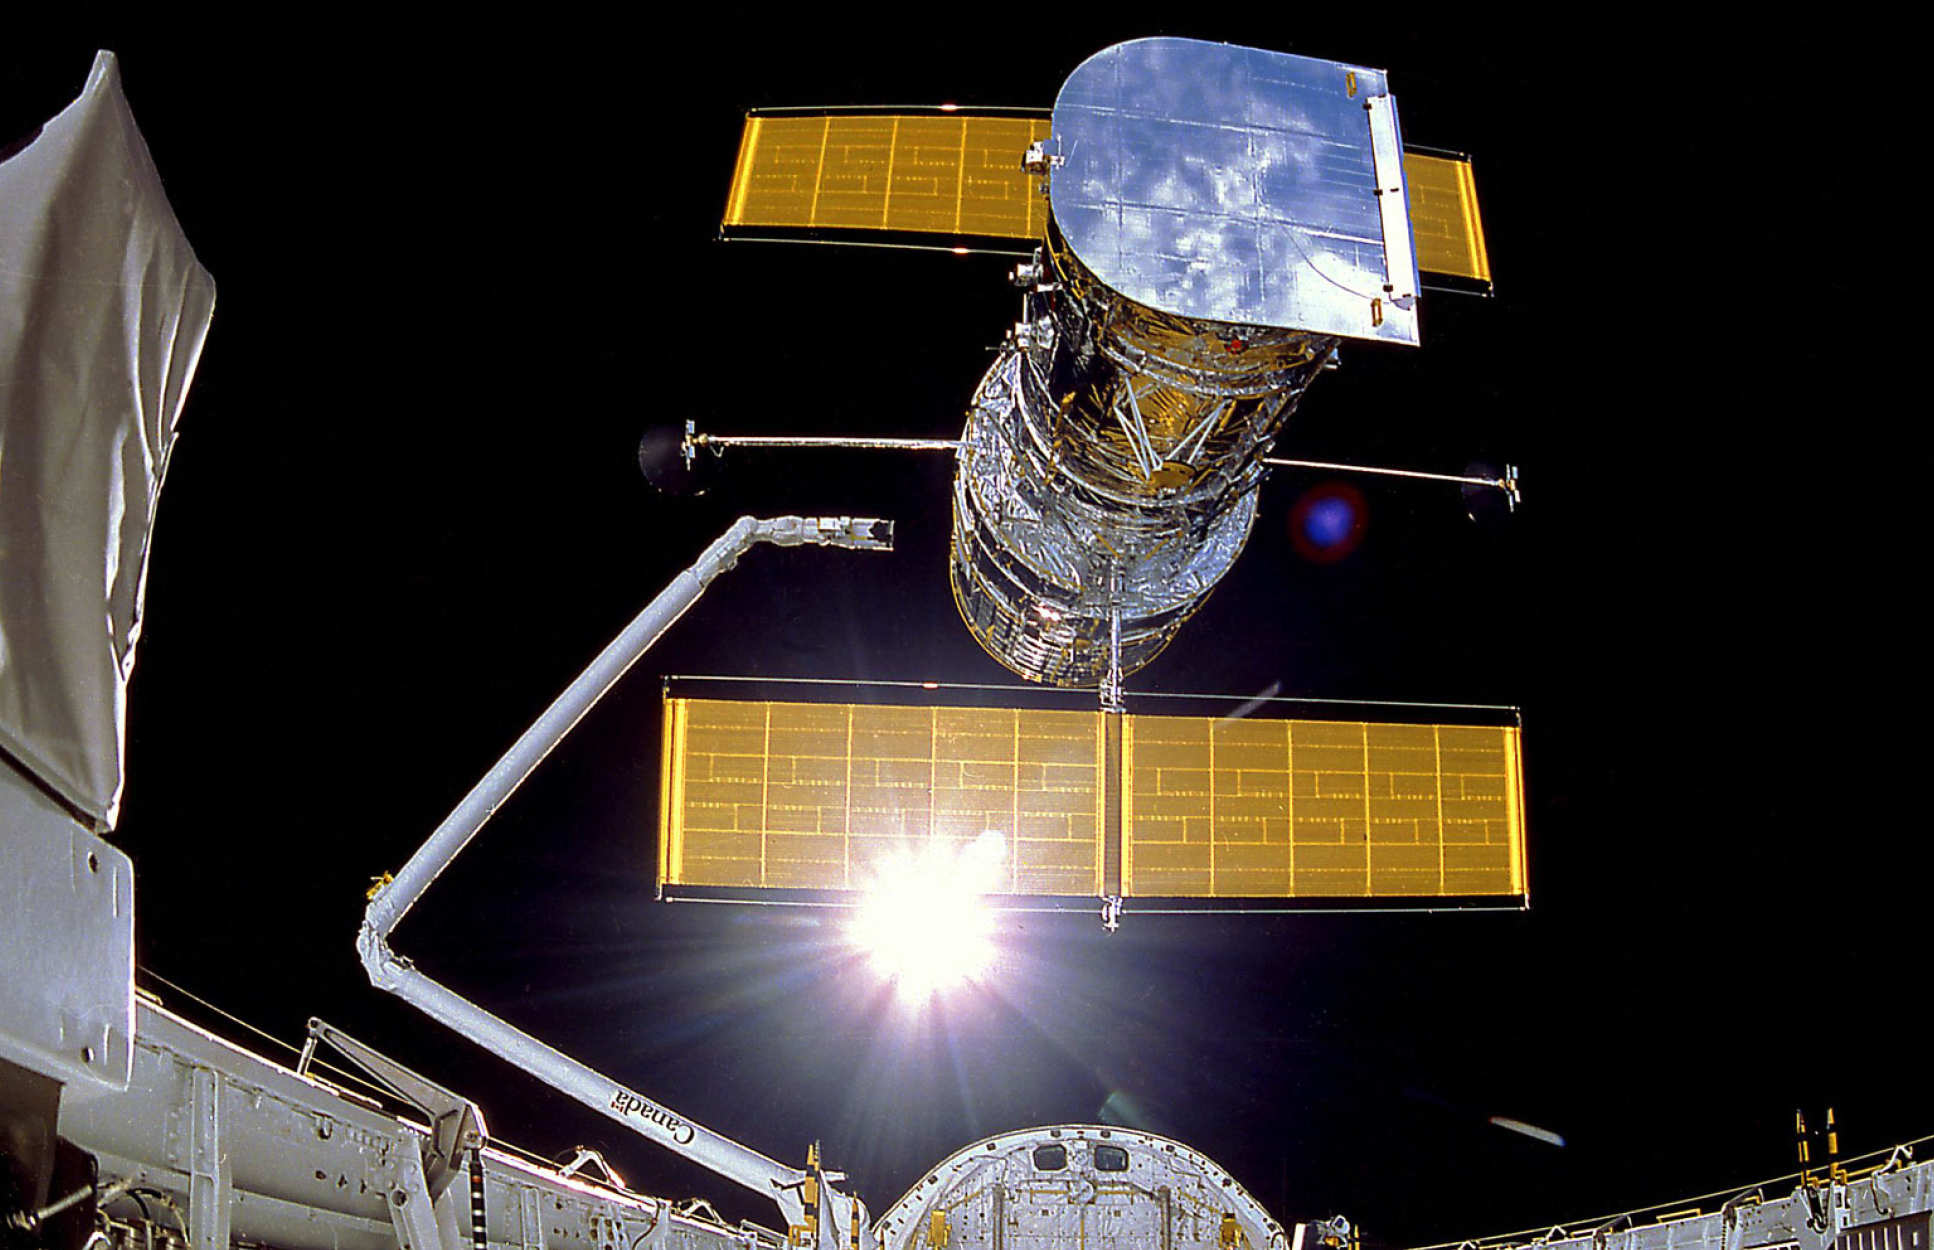 The deployment of the Hubble Space Telescope in April 1990